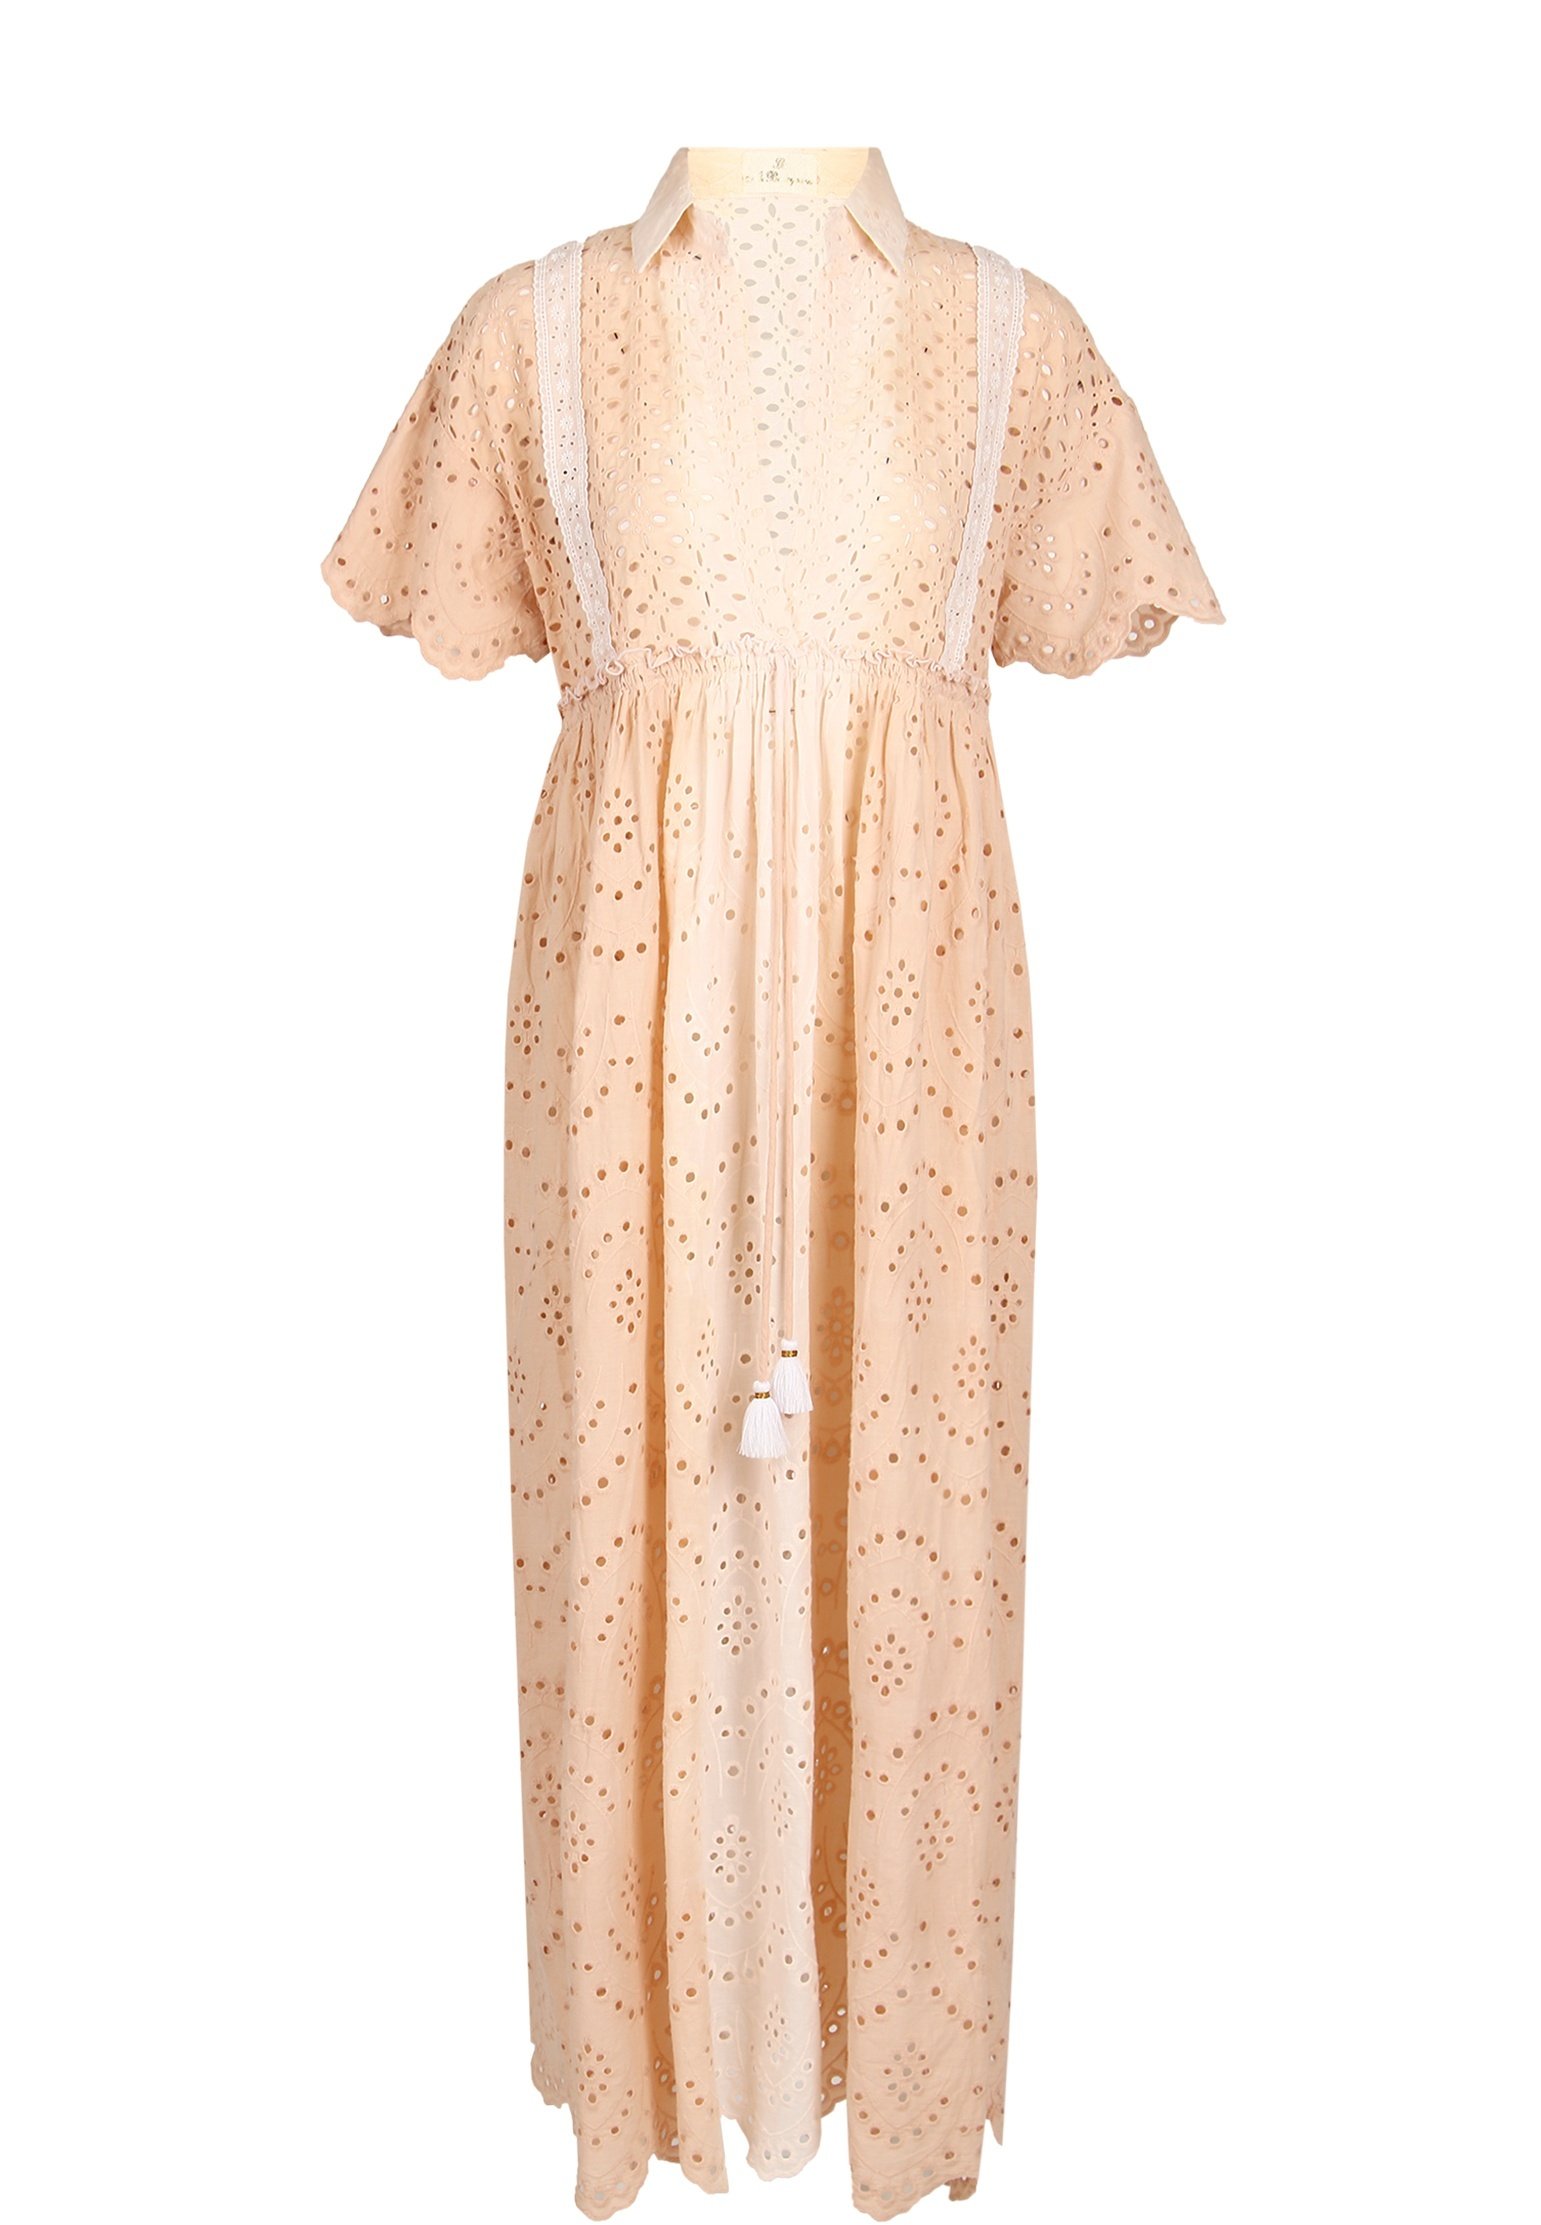 Dress LES NEO BOURGEOISES Color: beige (Code: 1023) in online store Allure